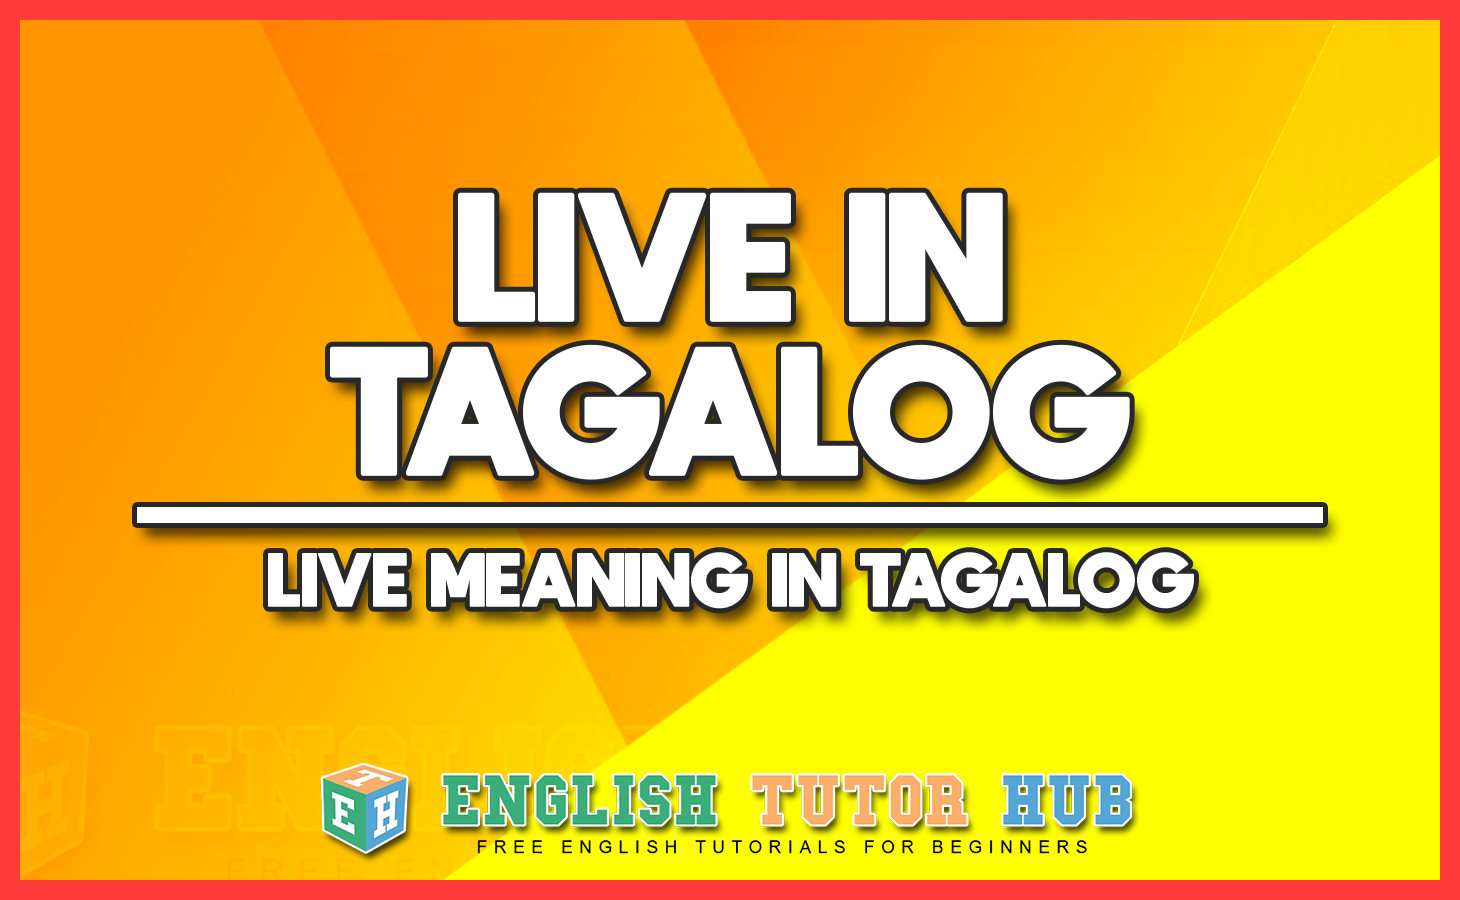 LIVE IN TAGALOG - LIVE MEANING IN TAGALOG